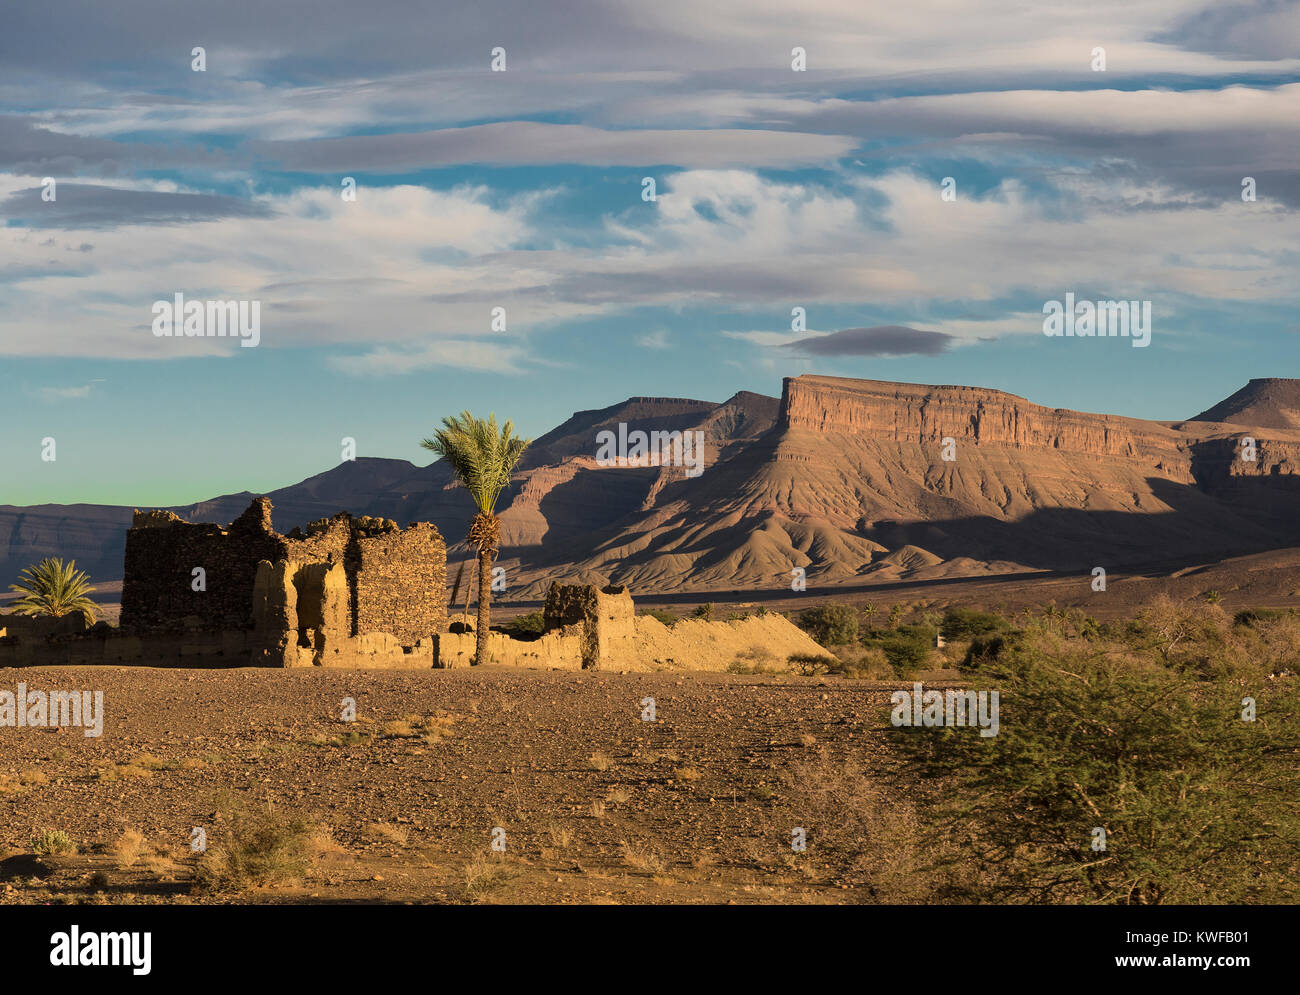 Moroccan landscape image with trees and rugged topography. Stock Photo